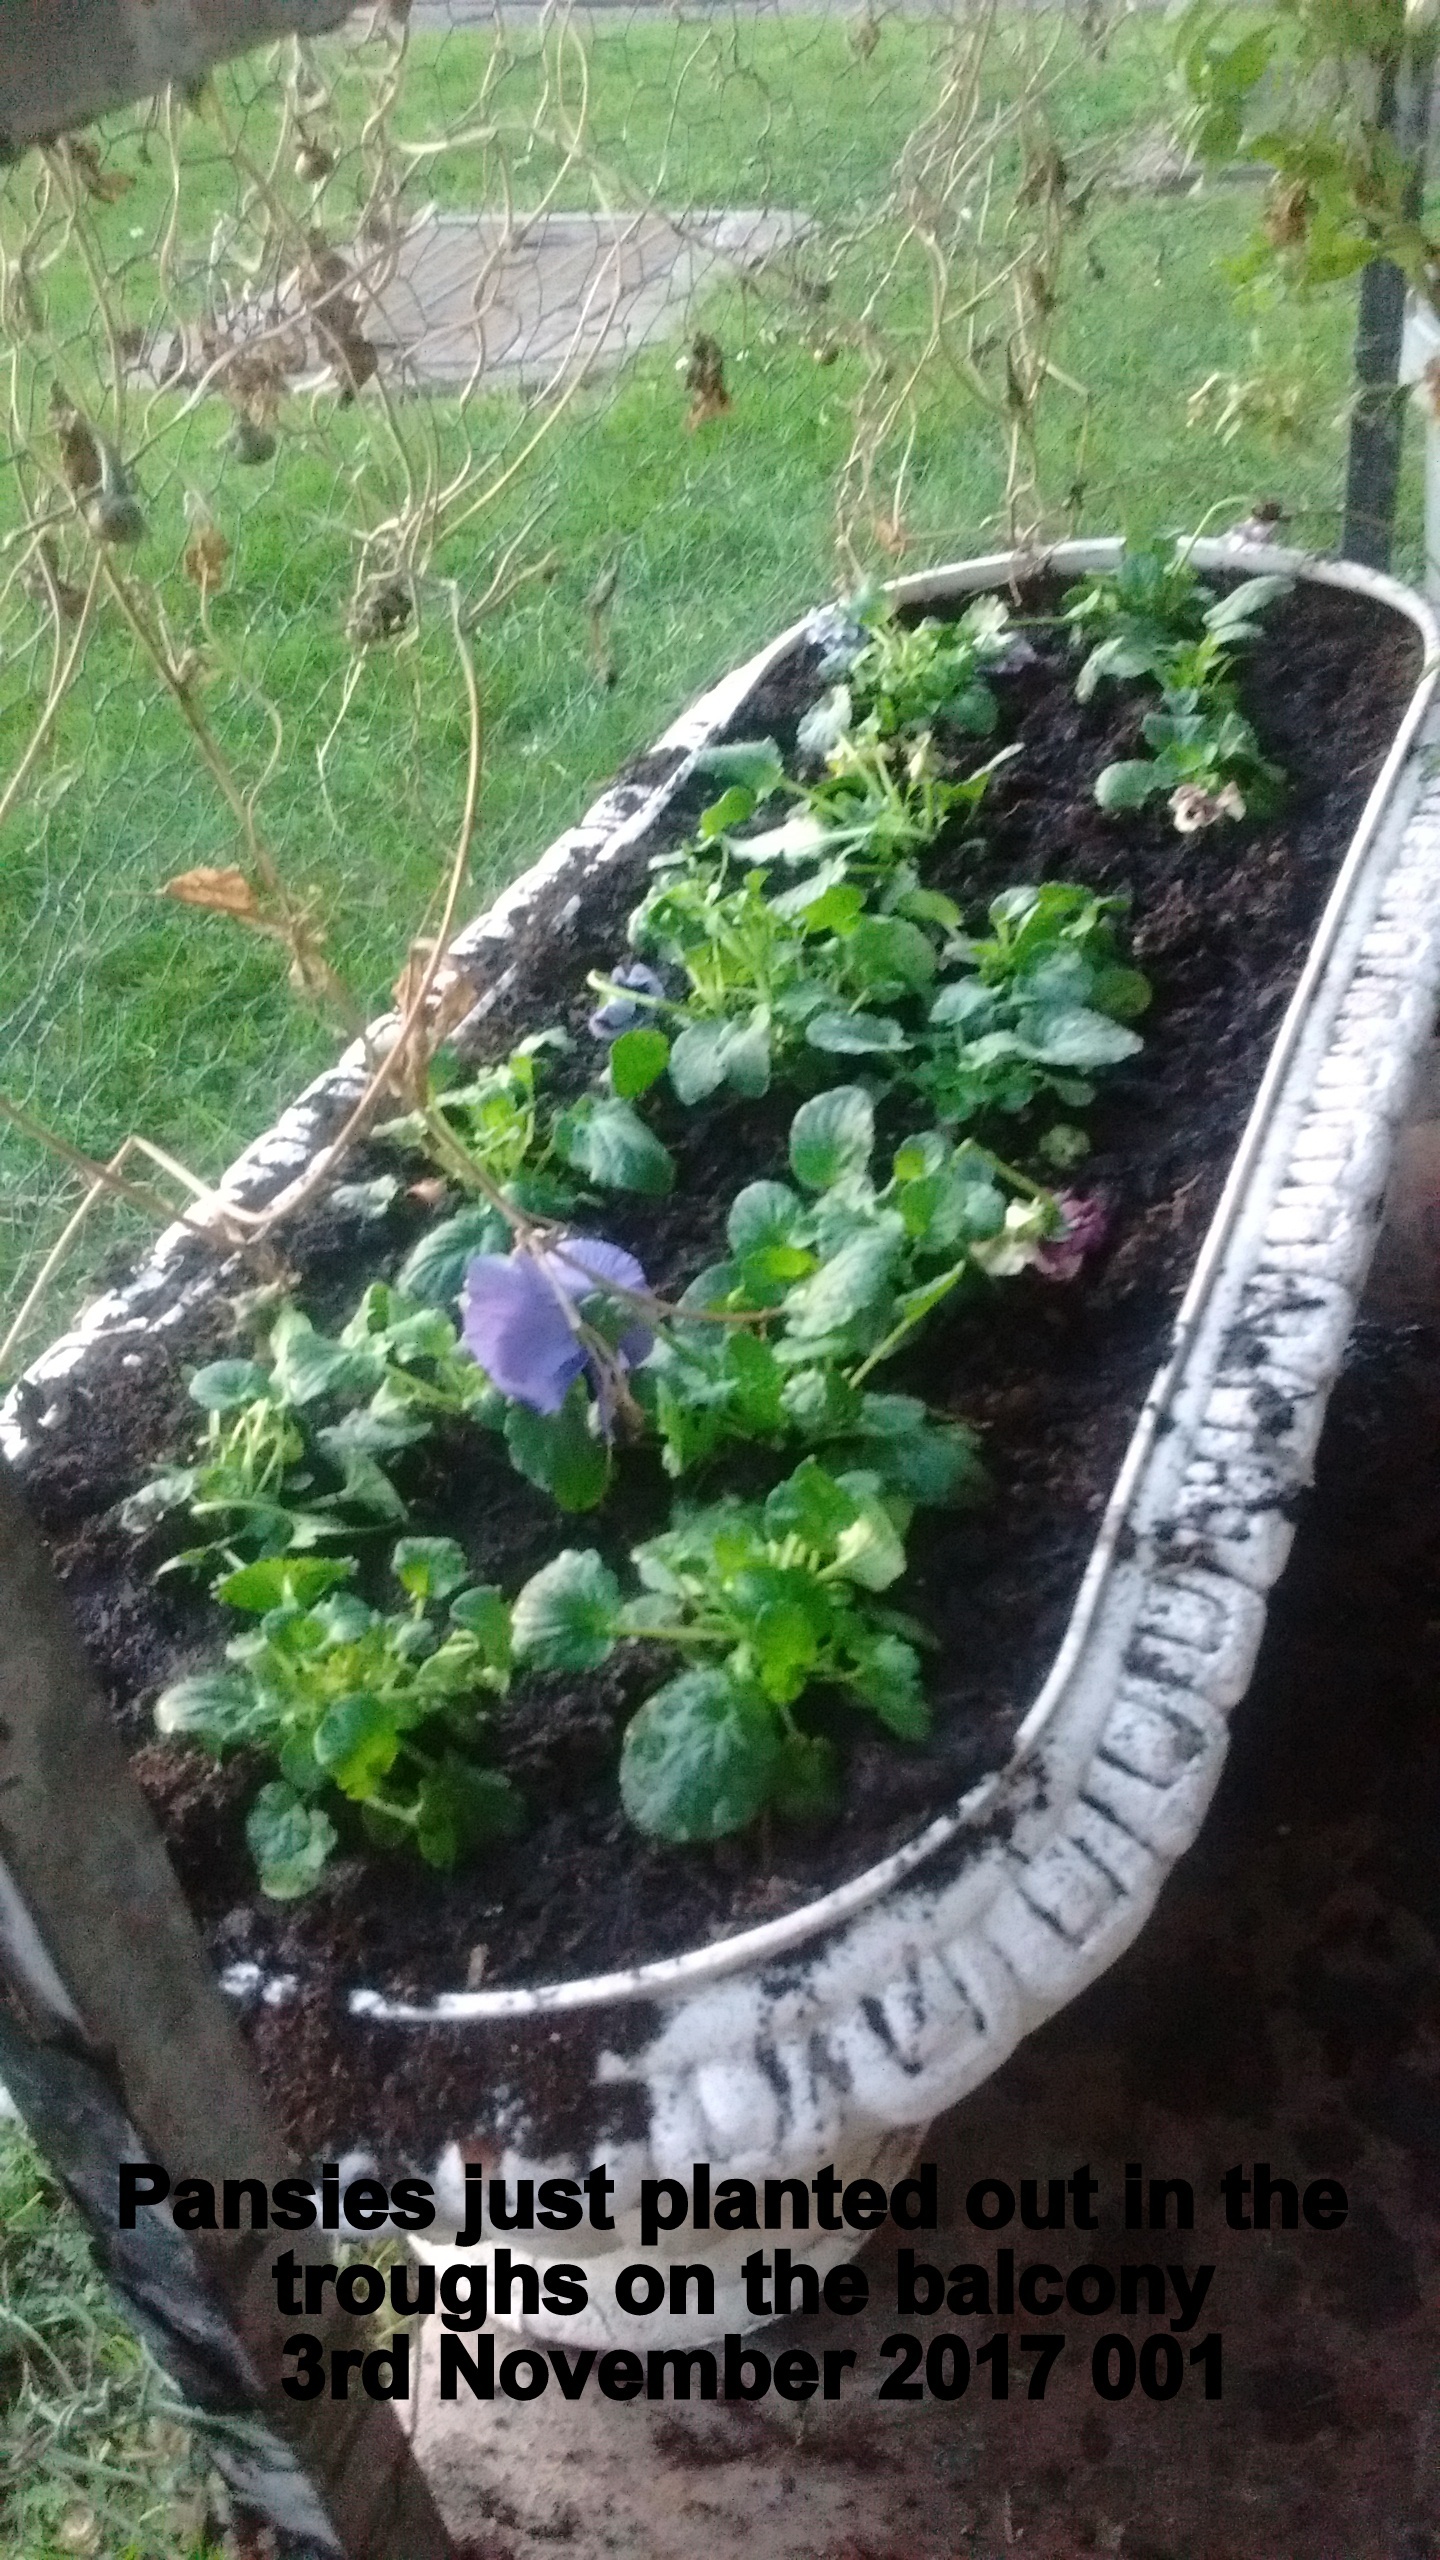 Pansies just planted out in the troughs on the balcony 3rd November 2017 001